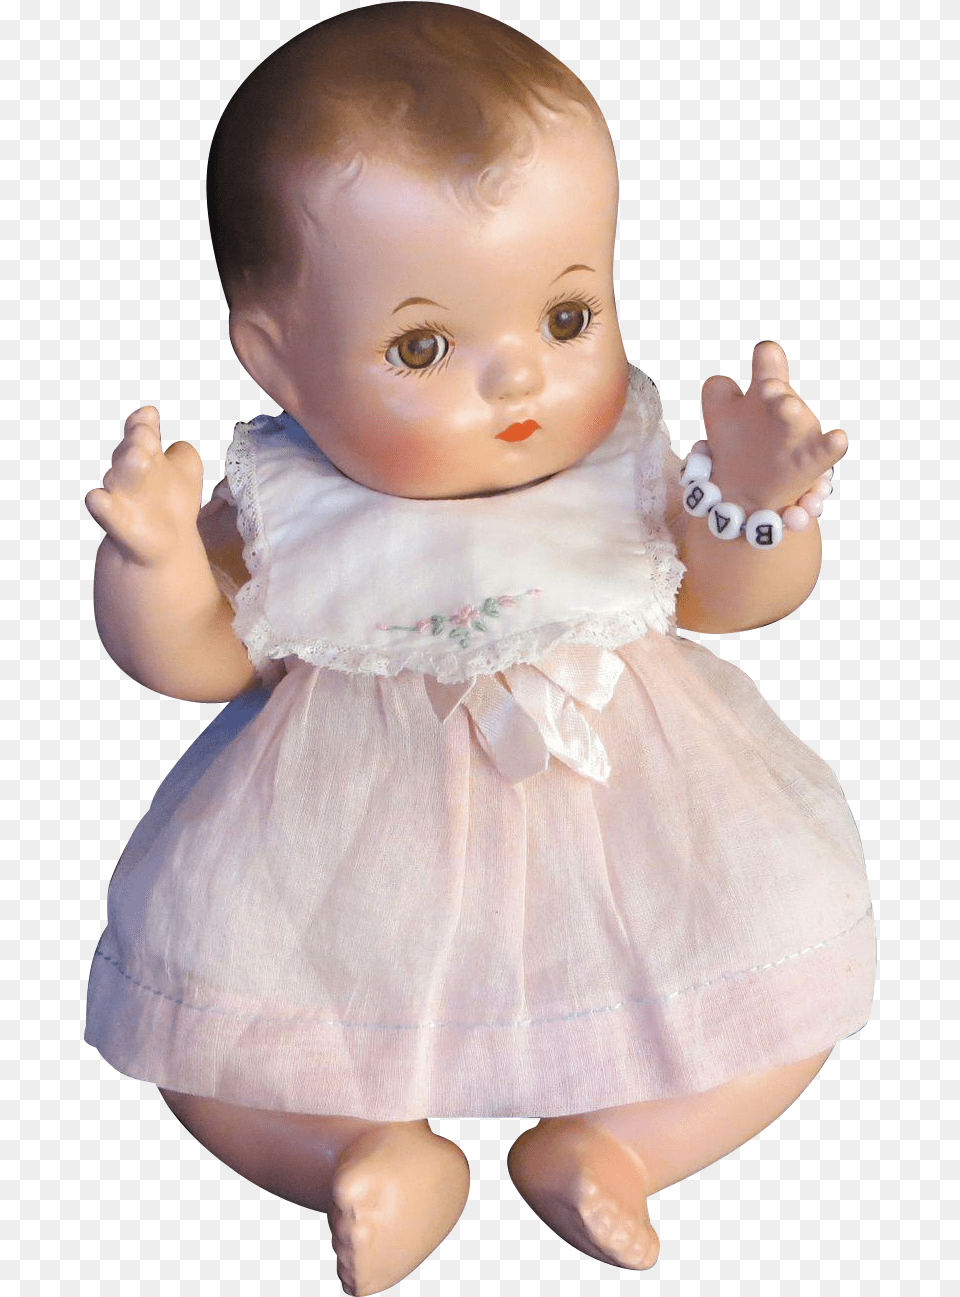 Composition Doll Dollhouse Jc Toys La Newborn Scary Dolls Transparent Background, Toy, Baby, Person, Face Png Image